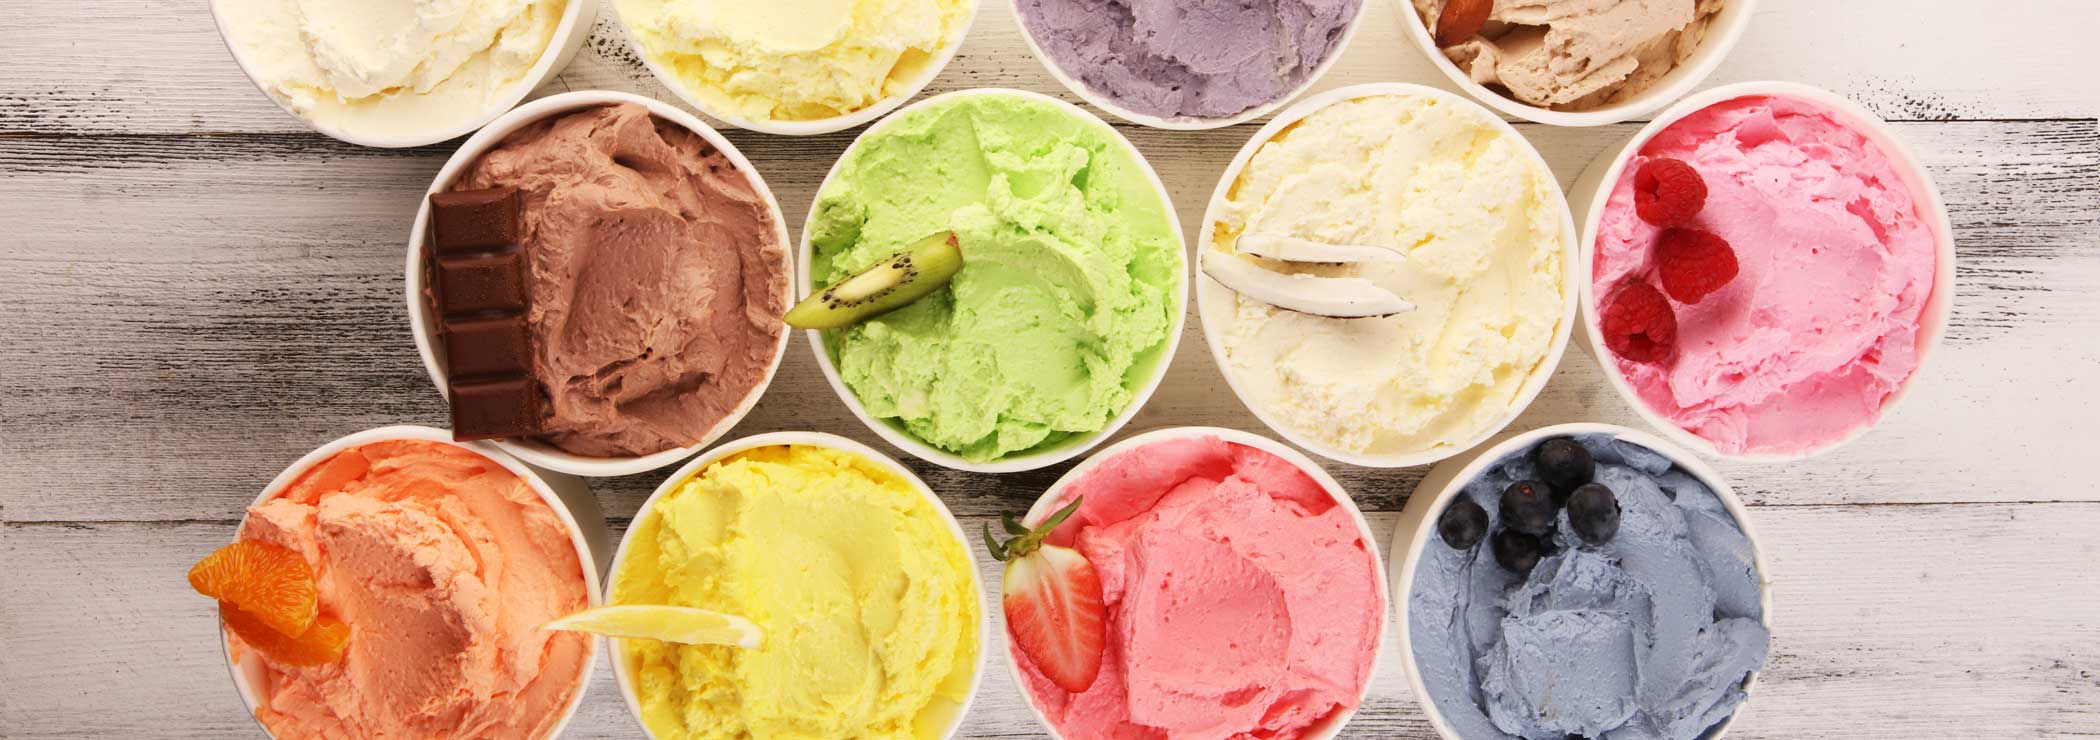 Ice cream flavors in cups